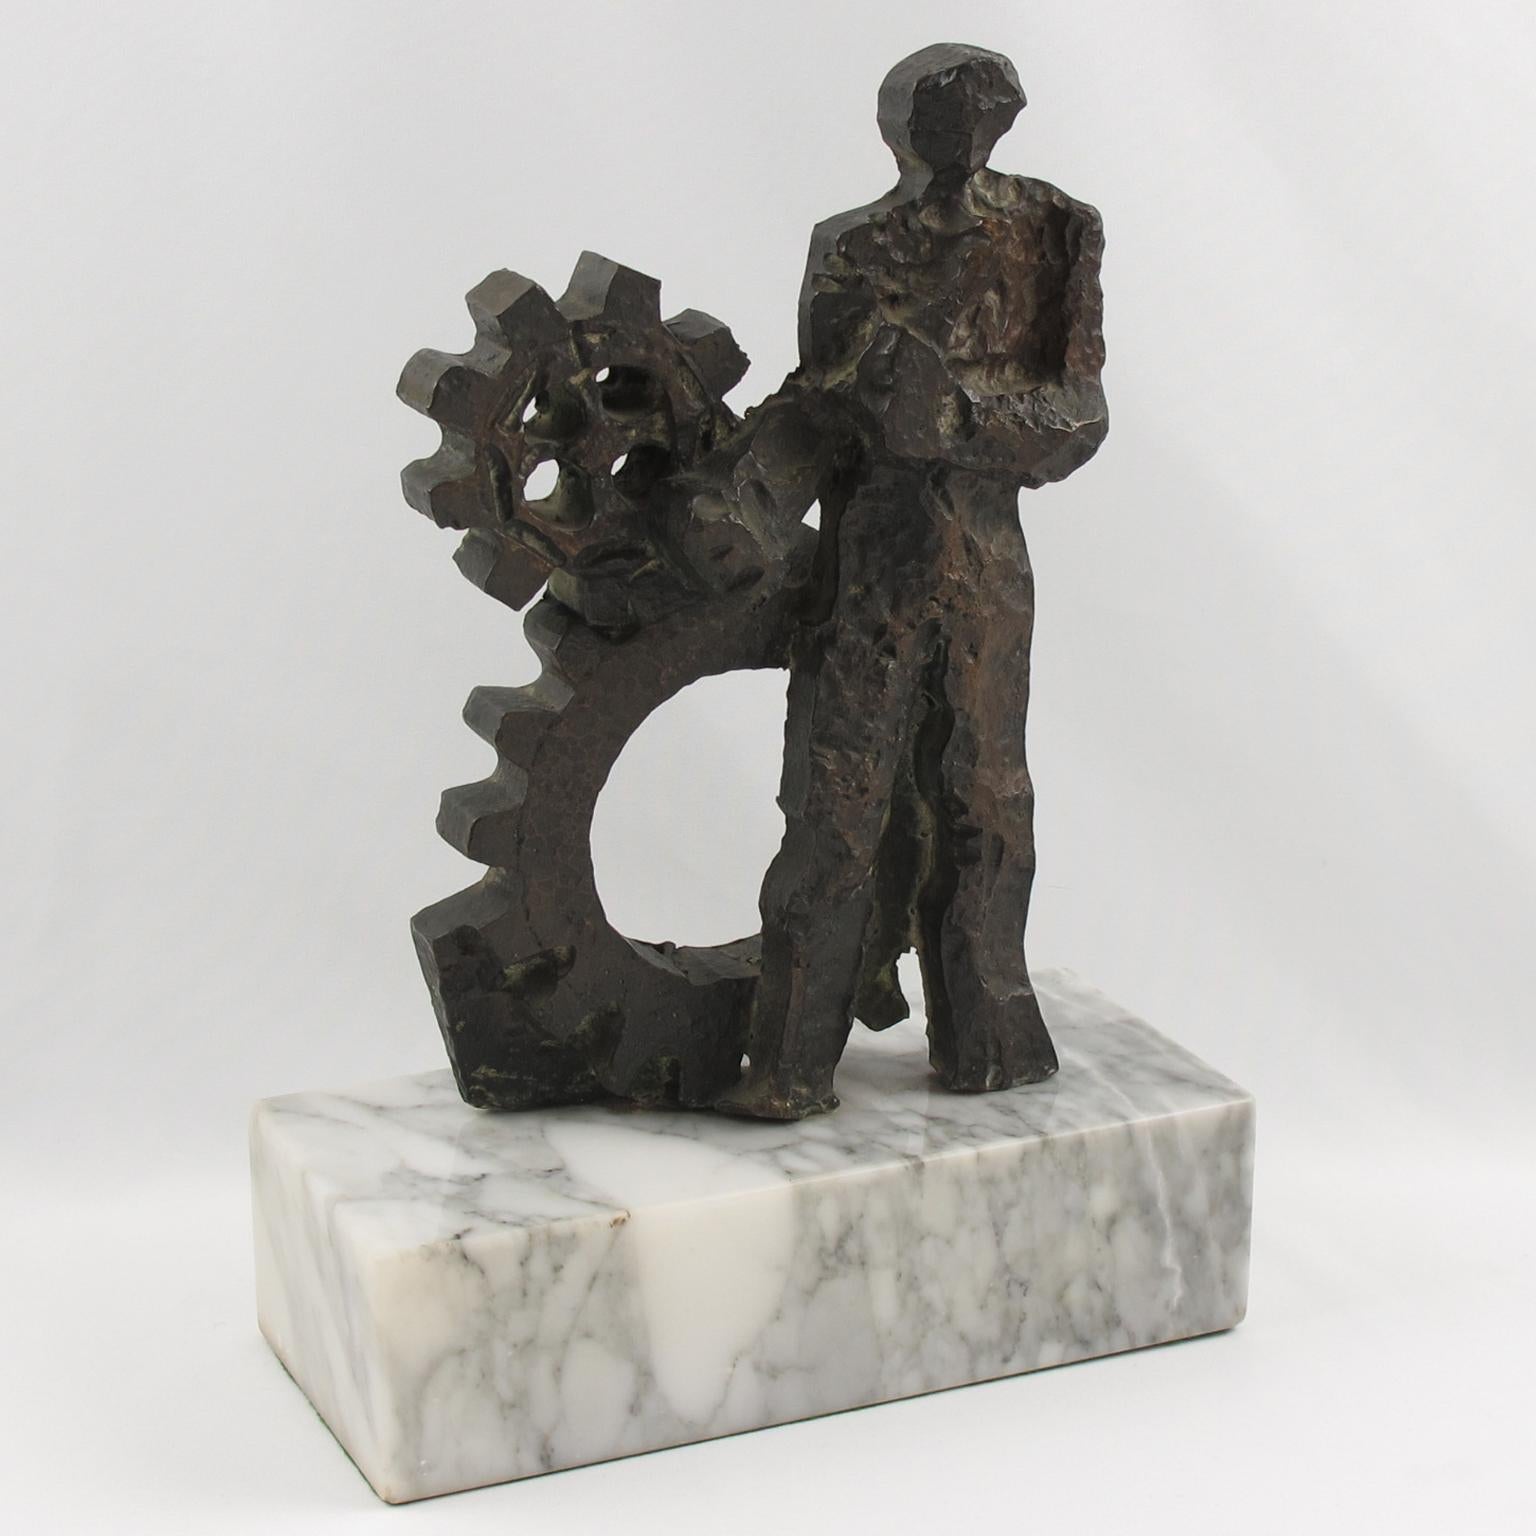 Brutalist Bronze Sculpture on Marble Base, Man and Machine, 1970s For Sale 5